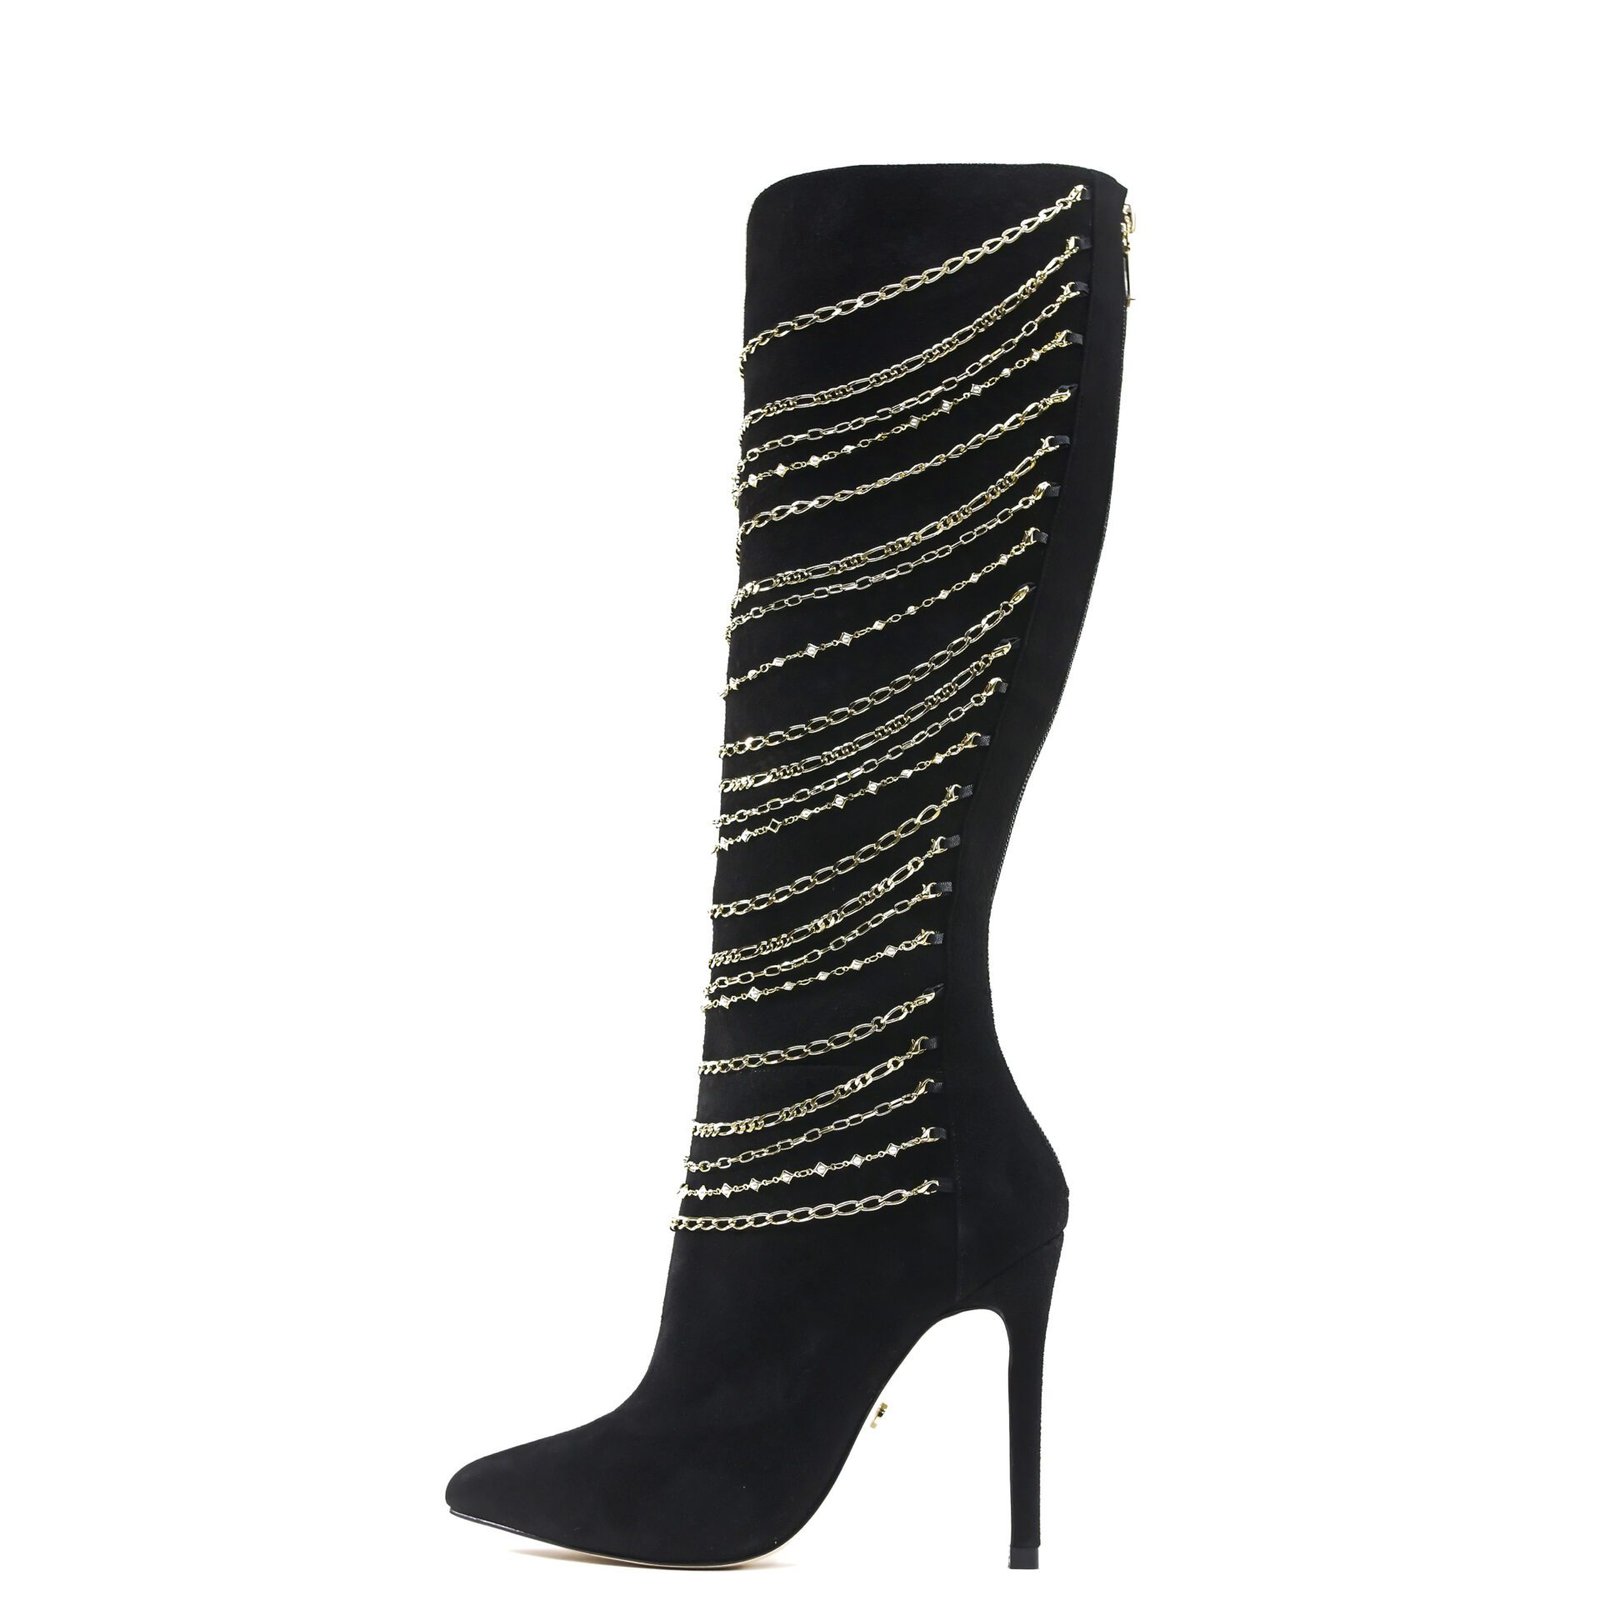 Chain Suede knee-high boots